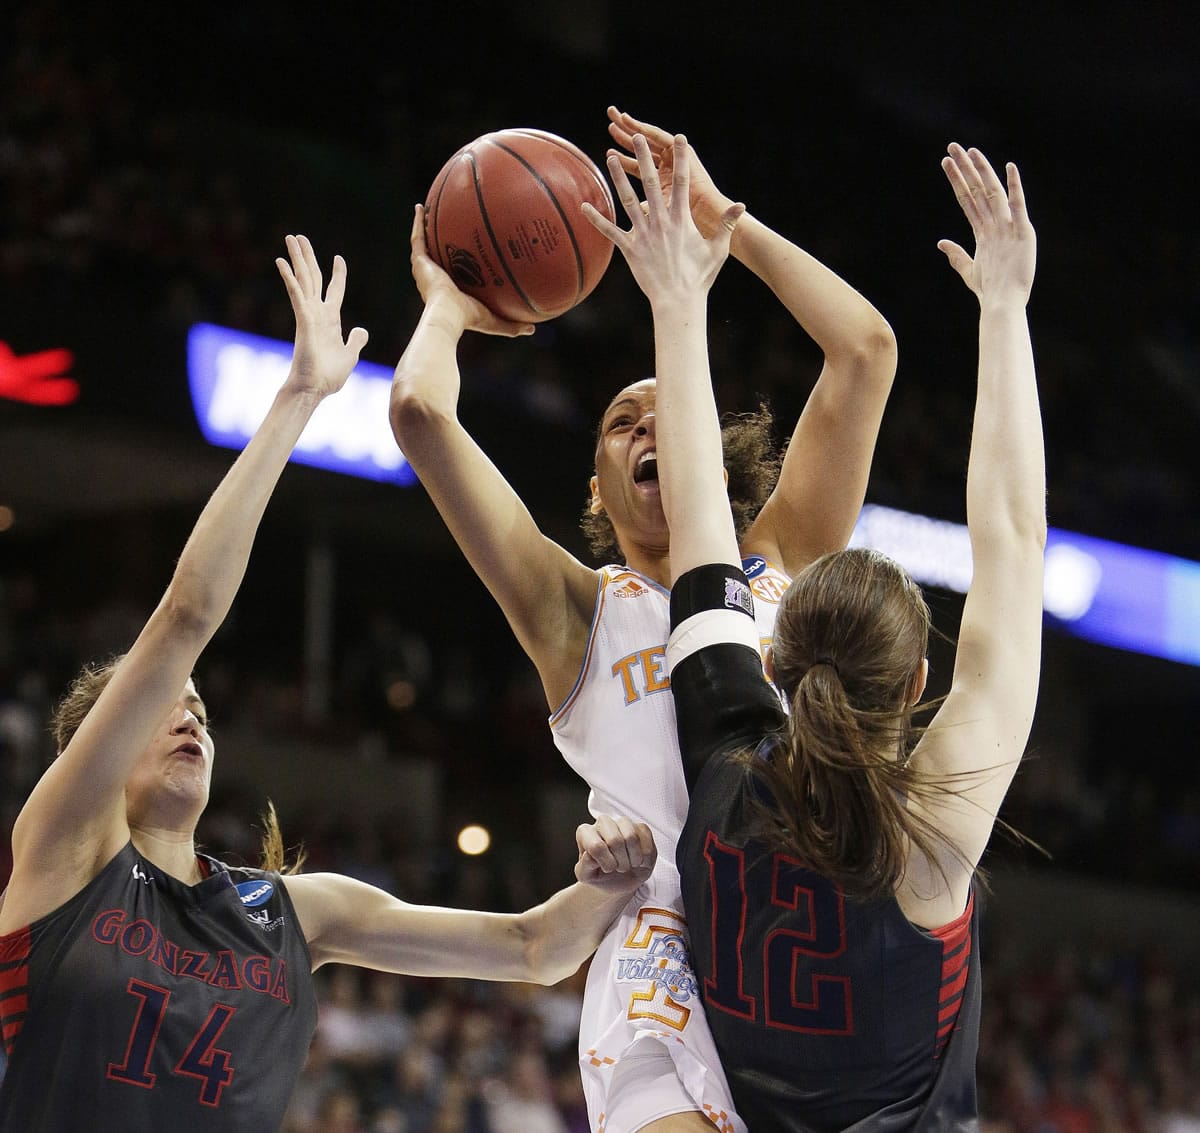 Tennessee's Cierra Burdick, center, shoots against Gonzaga's Sunny Greinacher (14) and Emma Wolfram (12) during the first half of the regional semifinal game in the NCAA tournament, Saturday, March 28, 2015, in Spokane.